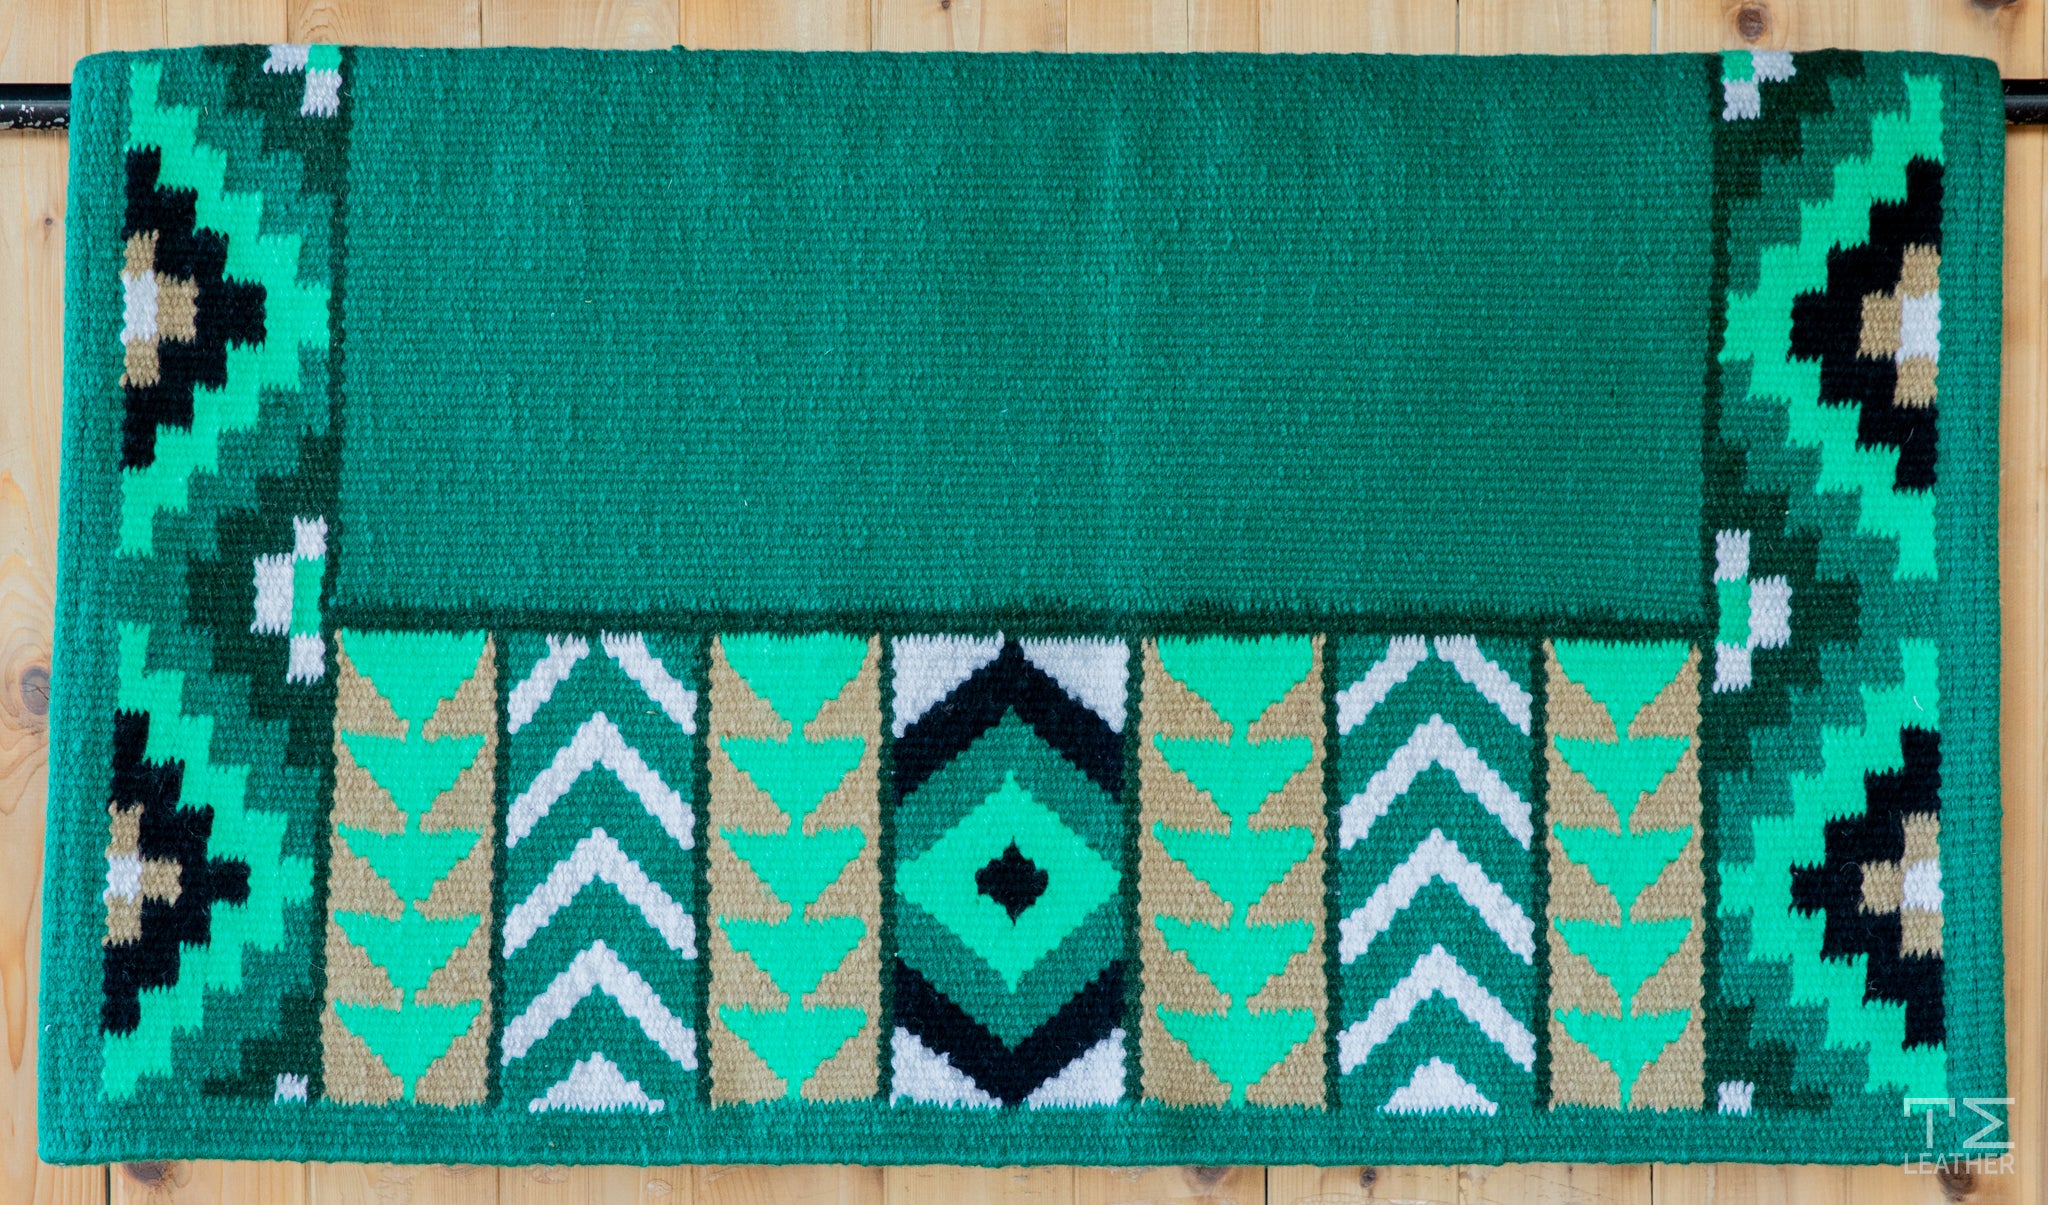 Emerald Green, Bright Green, Sand, Black w/ White Accents Flat Show Blanket